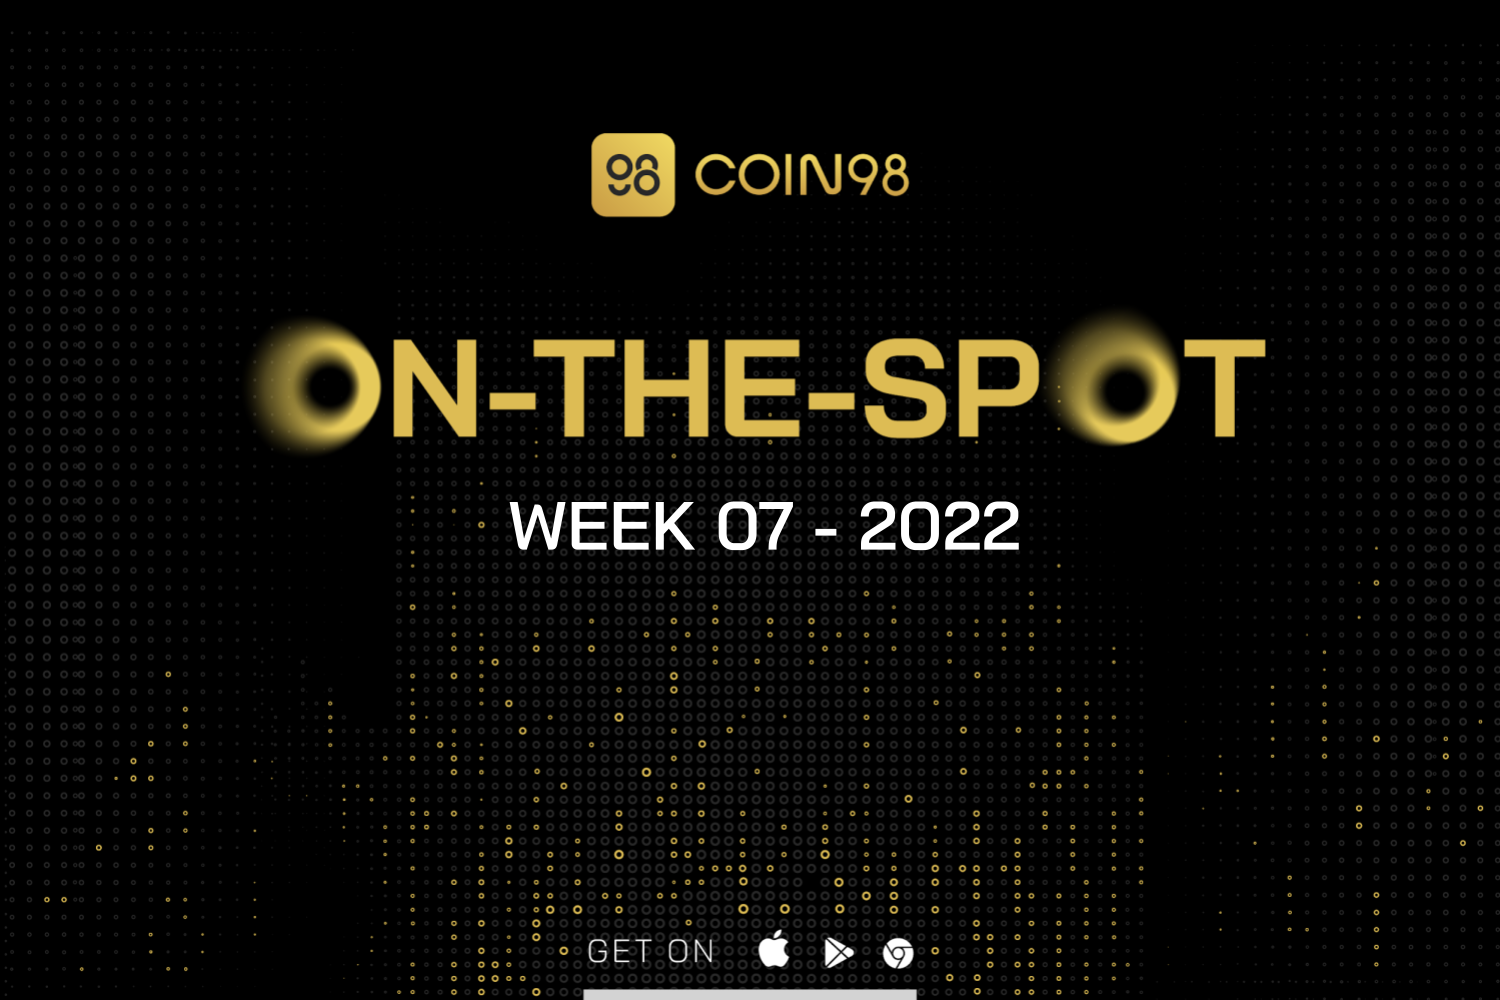 Coin98 on-the-spot W7.2022 